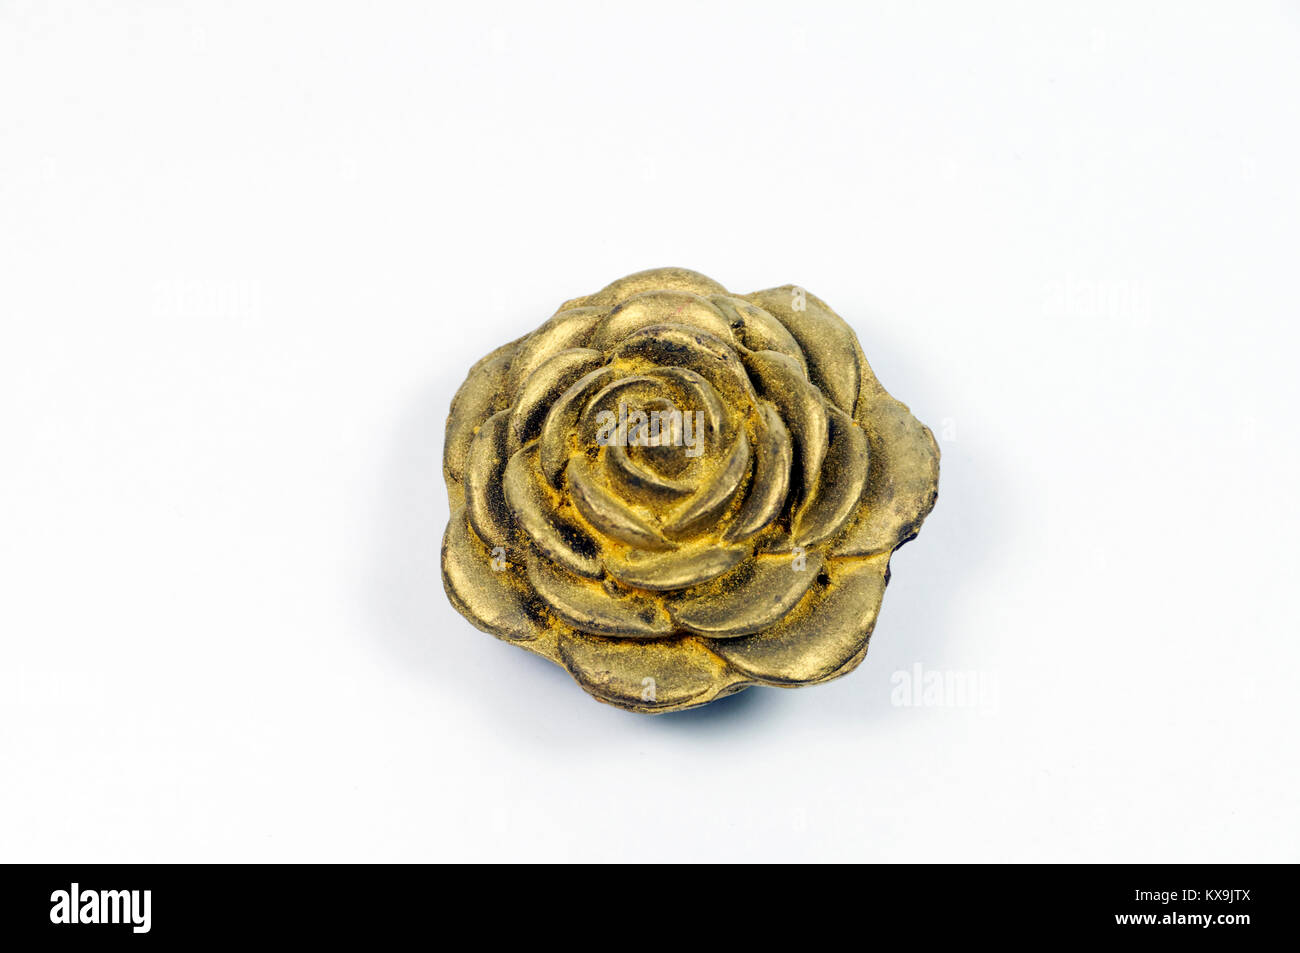 Ornamental, gold painted chocolate rose. Stock Photo